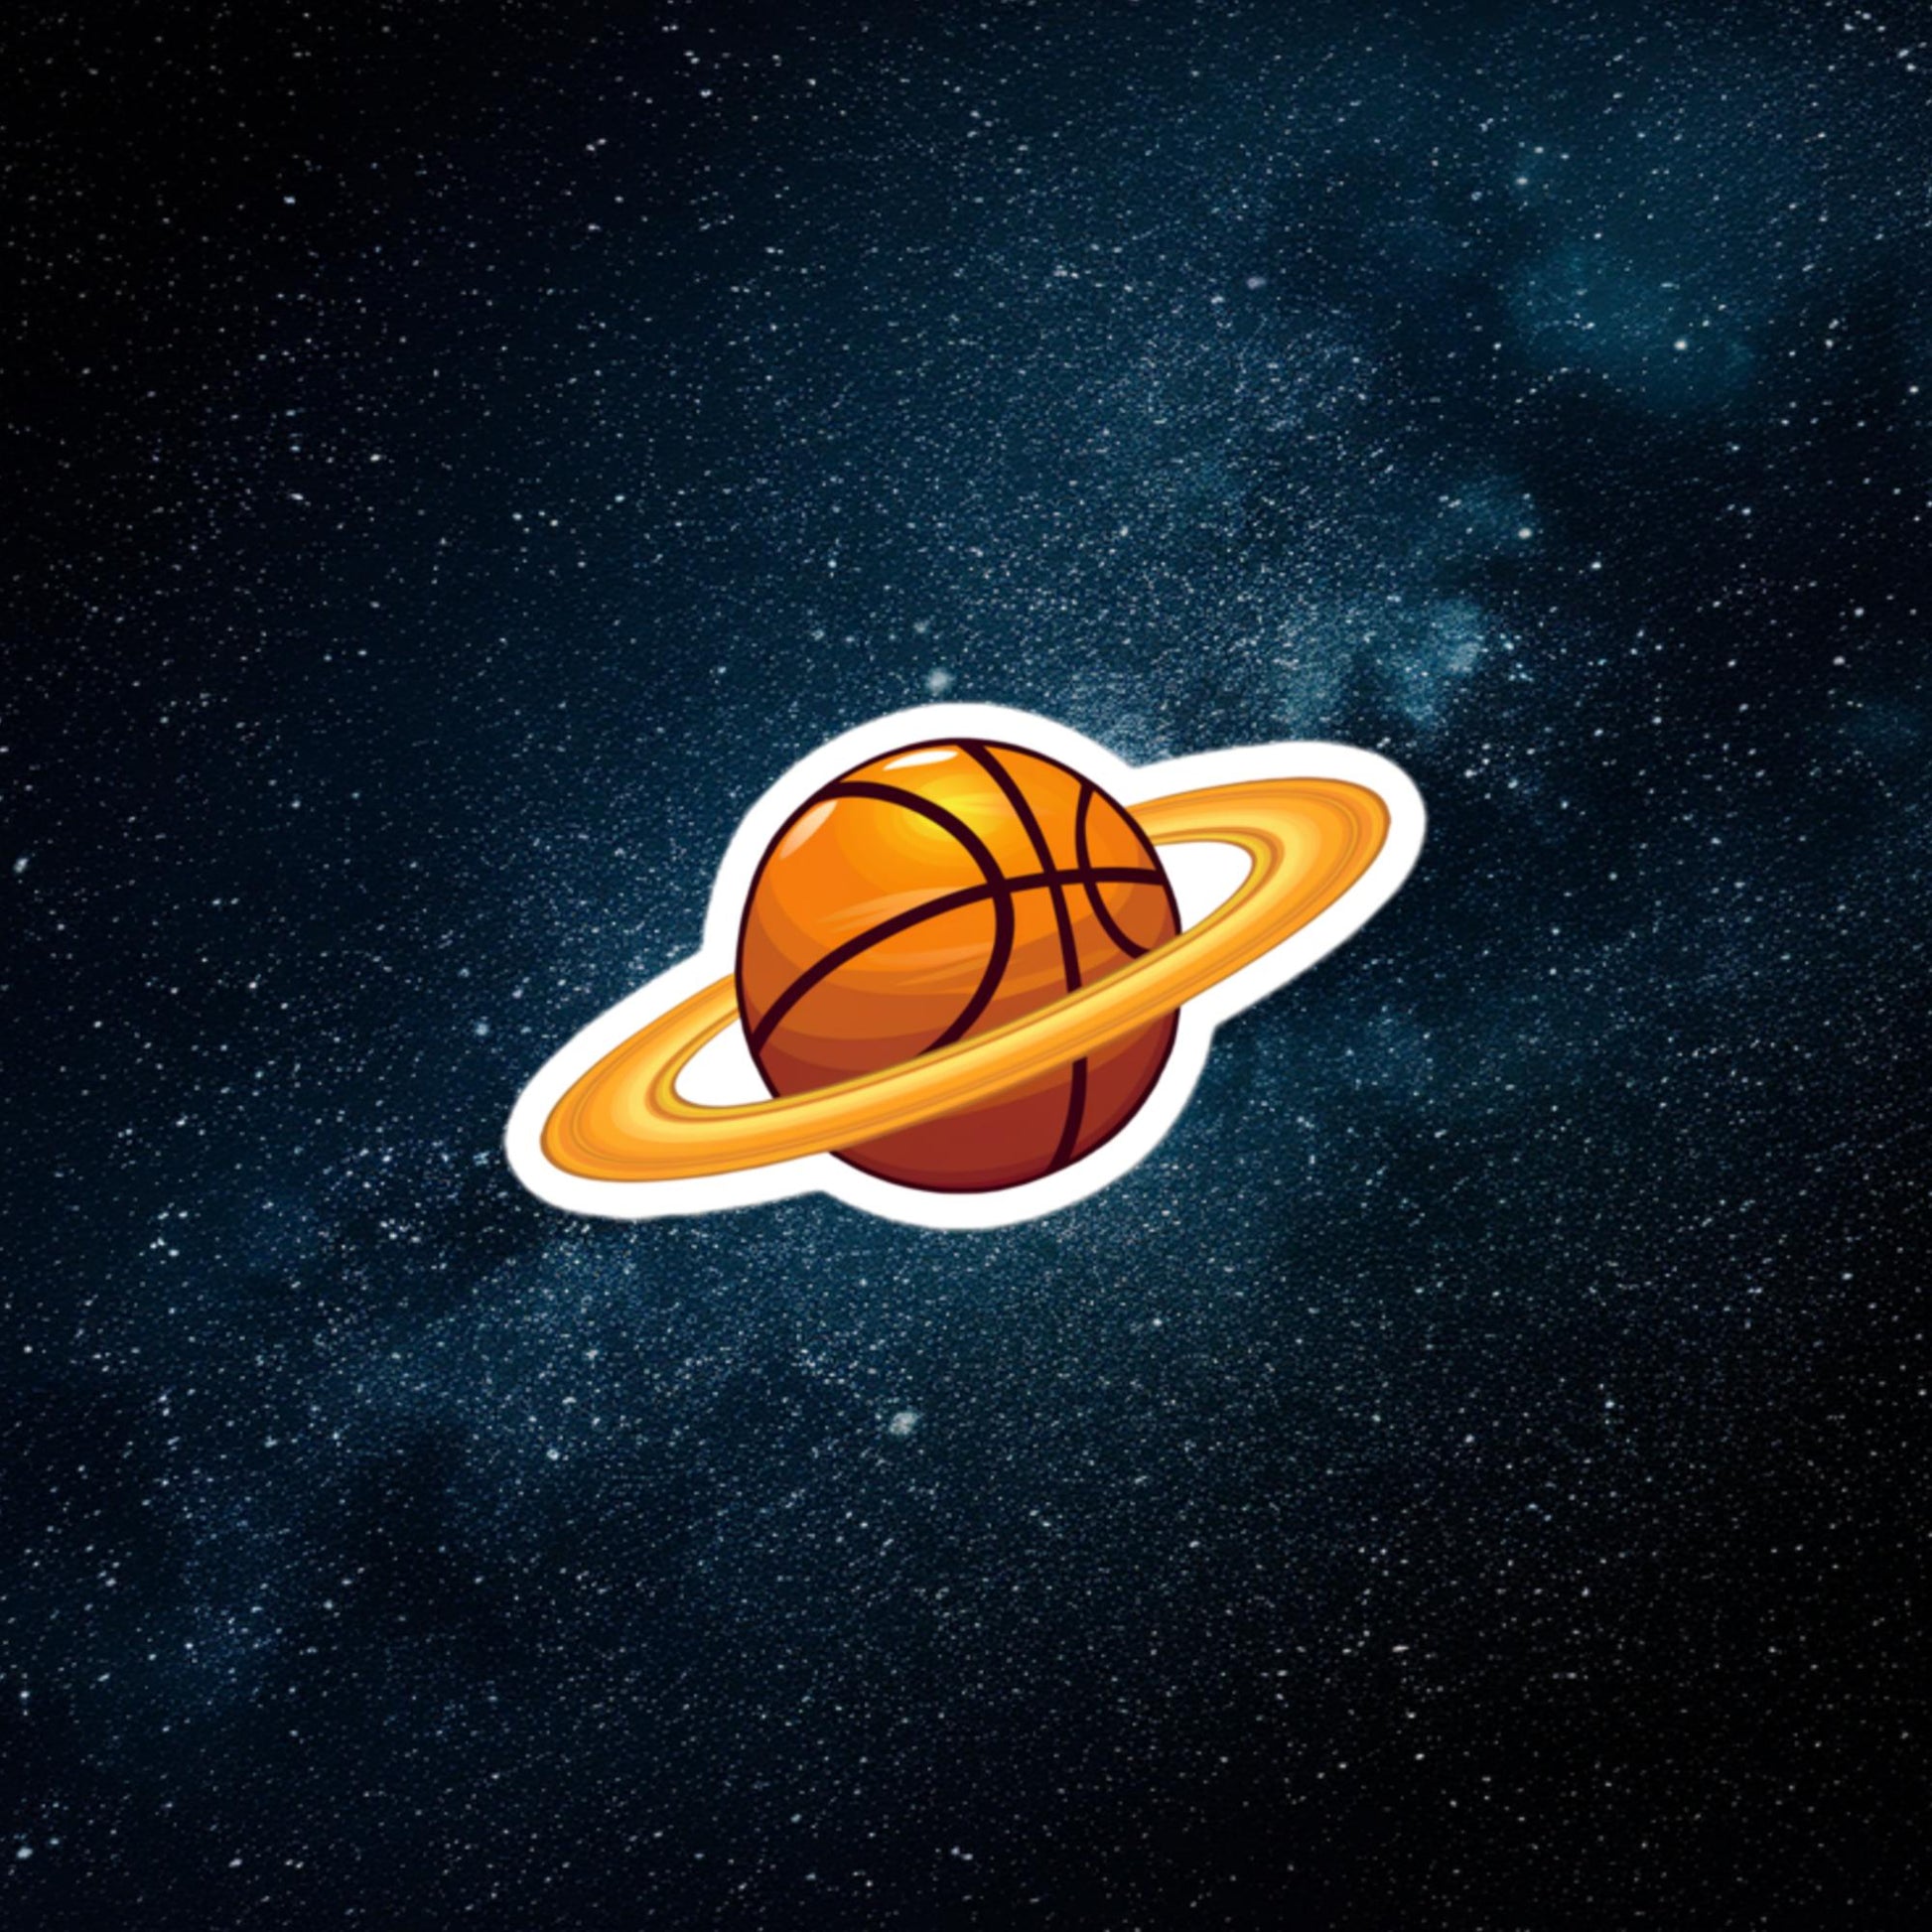 Basketball Planet Ball is Life Bubble-free stickers Next Cult Brand